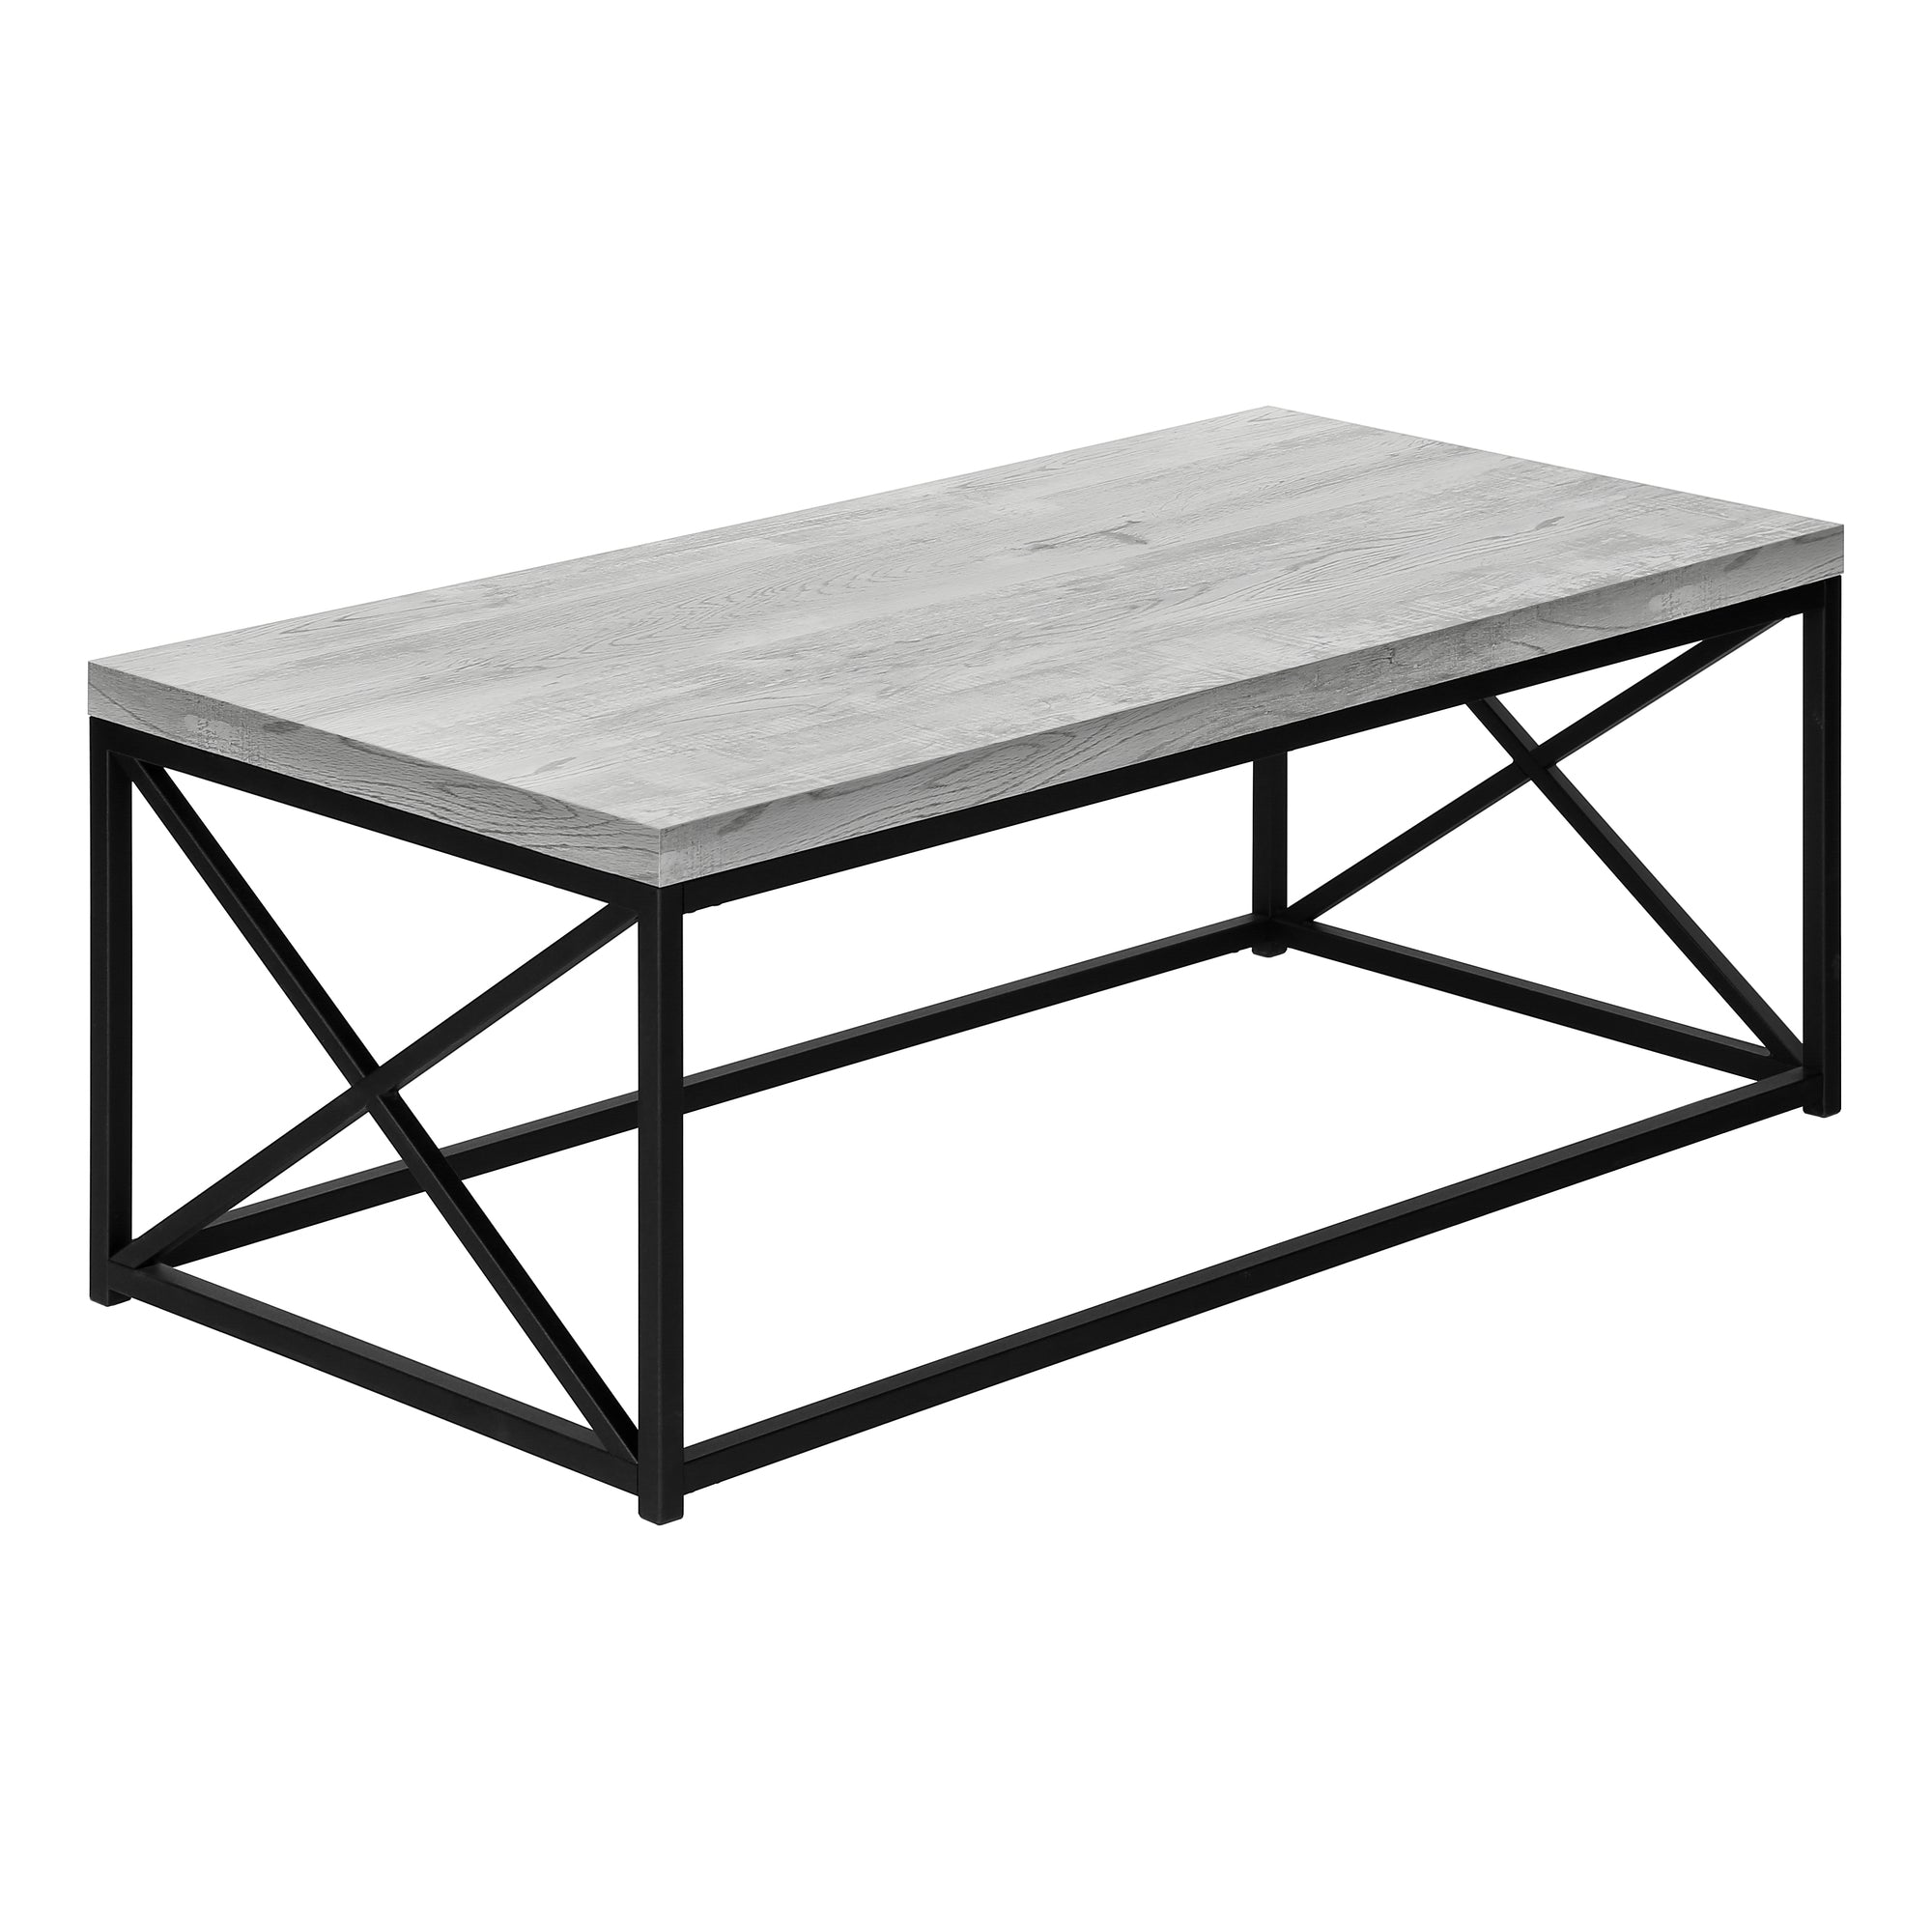 MN-563417    Coffee Table, Accent, Cocktail, Rectangular, Living Room, Metal Frame, Laminate, Grey Reclaimed Wood Look, Black, Contemporary, Modern